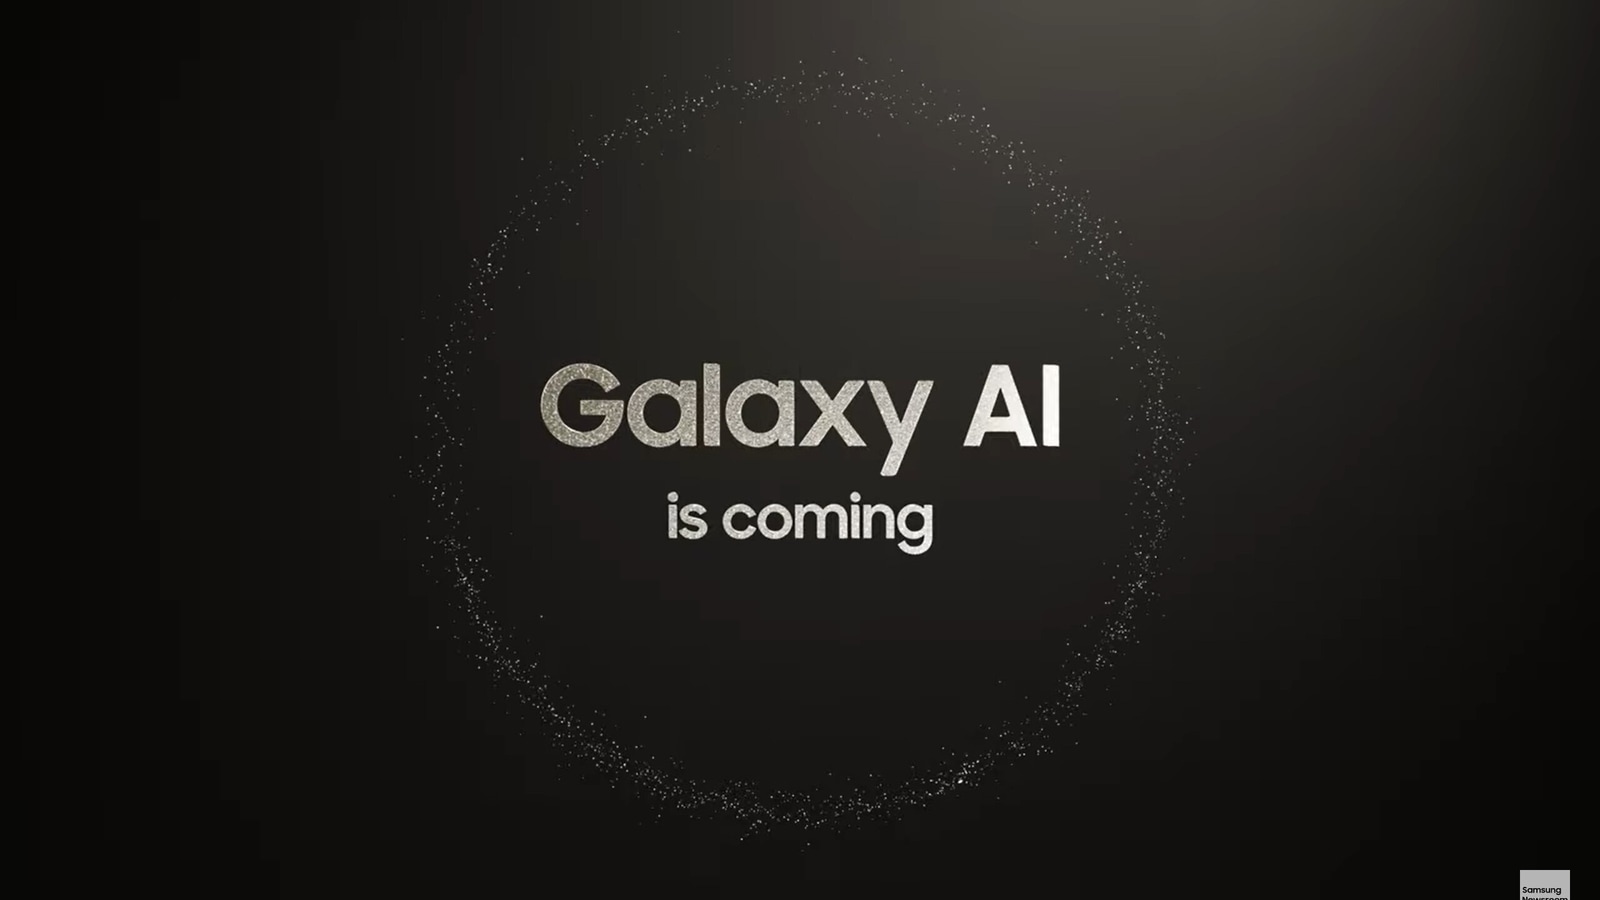 Samsung Galaxy Unpacked Occasion introduced for January 17; Will unveil “all-new cellular expertise powered by AI”